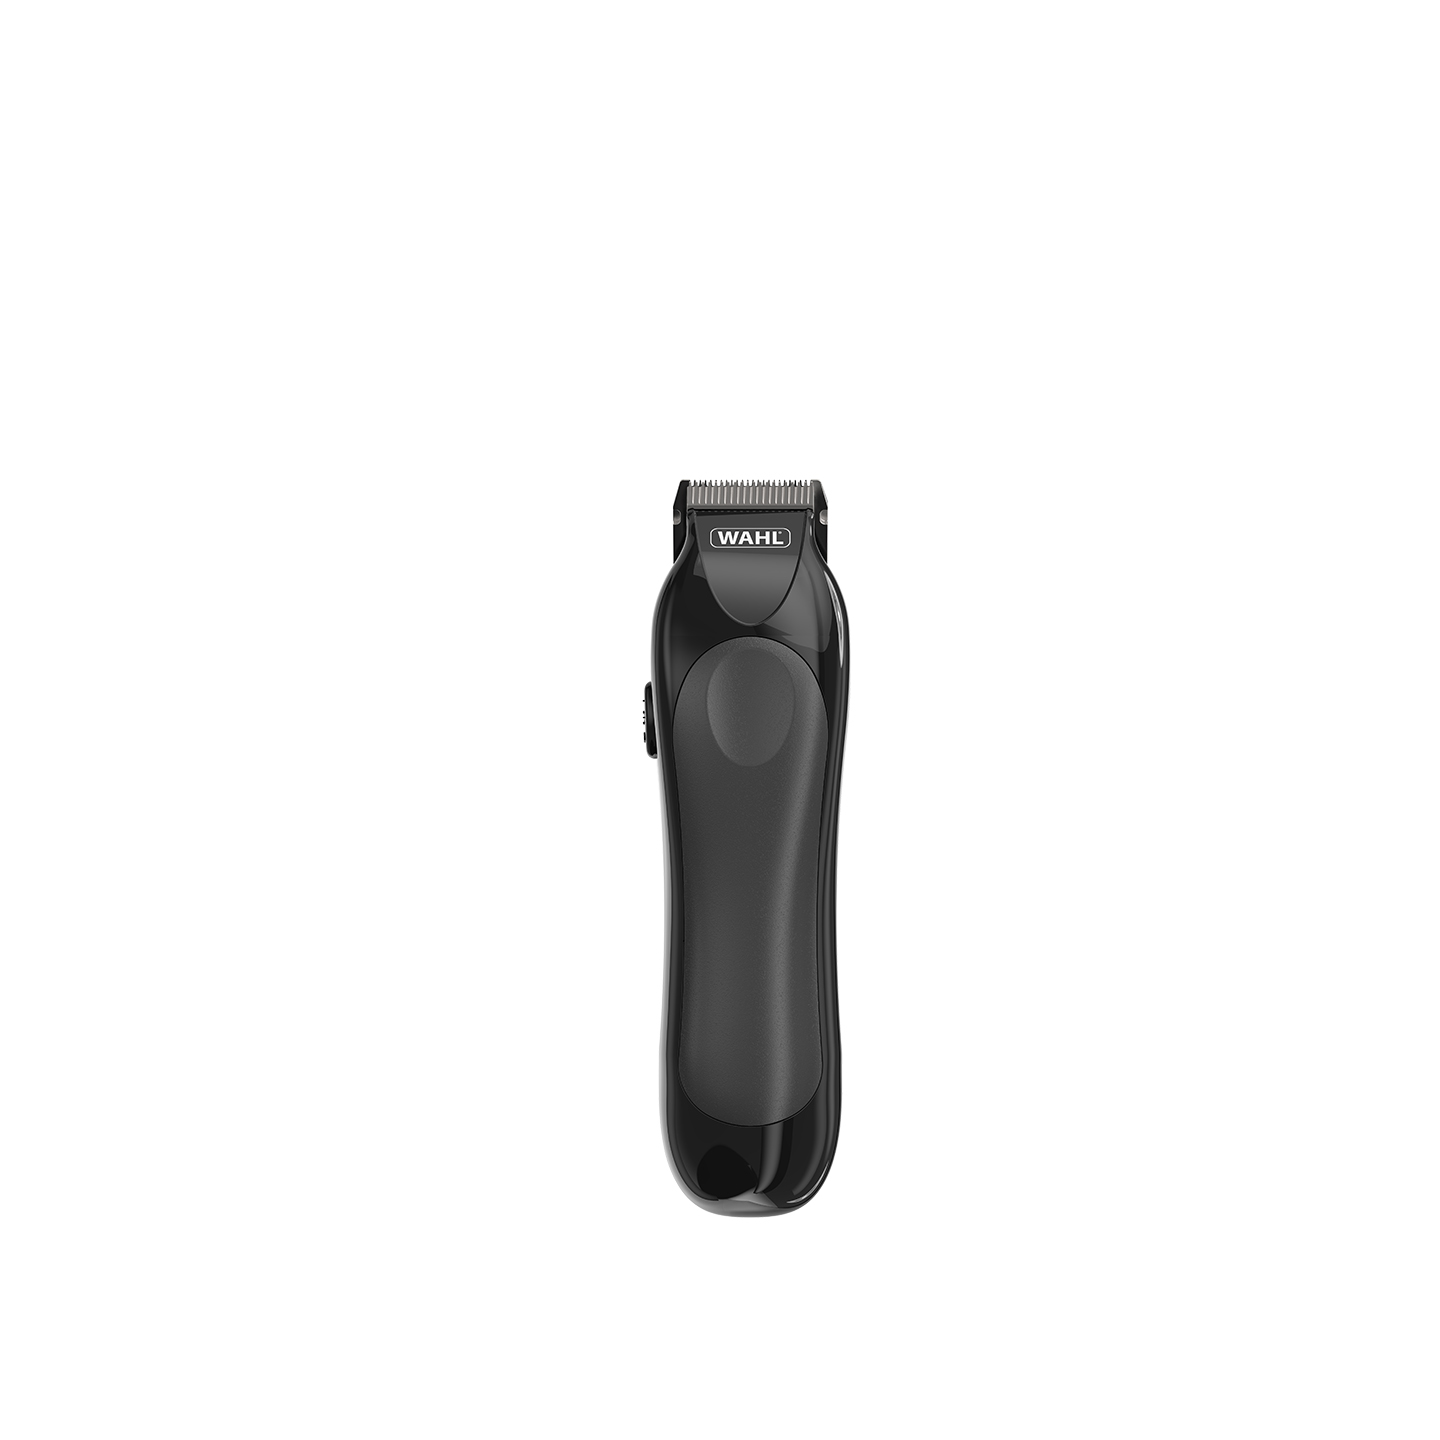 wahl mini clippers cordless